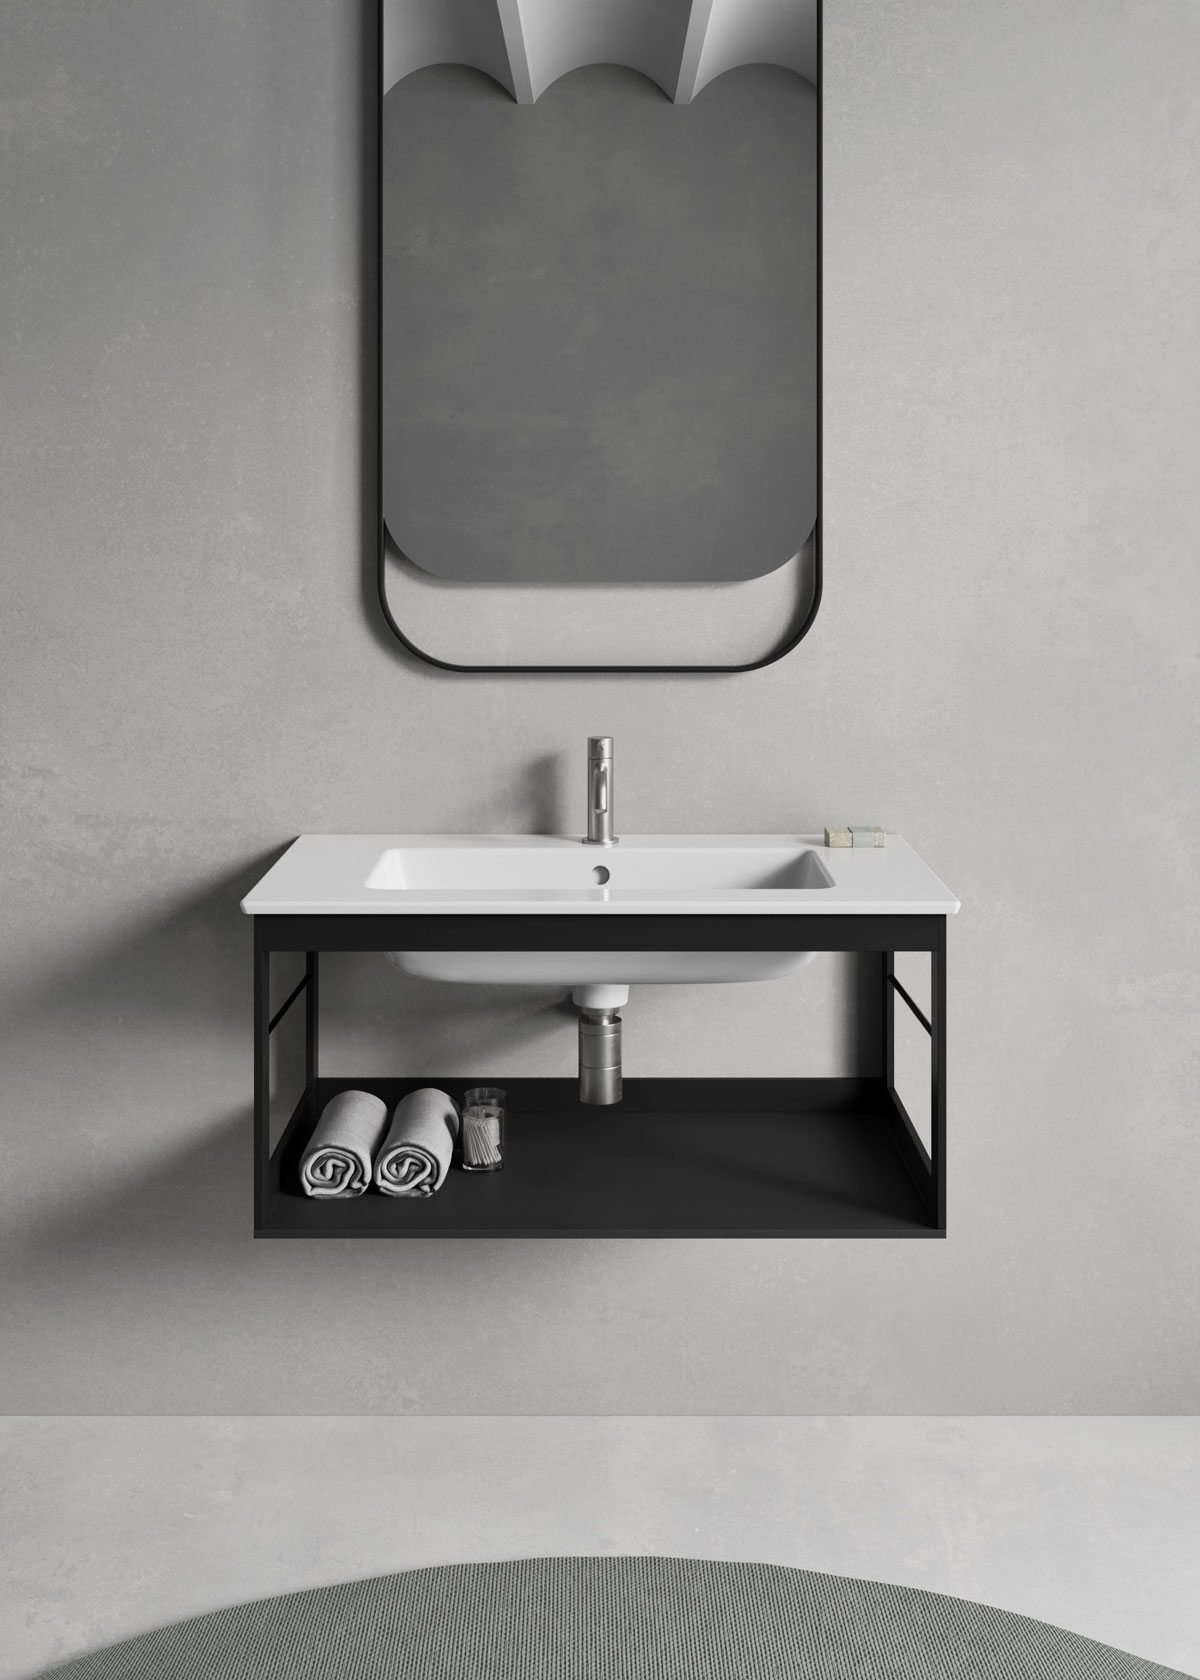 GSI® ceramica Official website - Sanitary ware and bathroom furniture ...